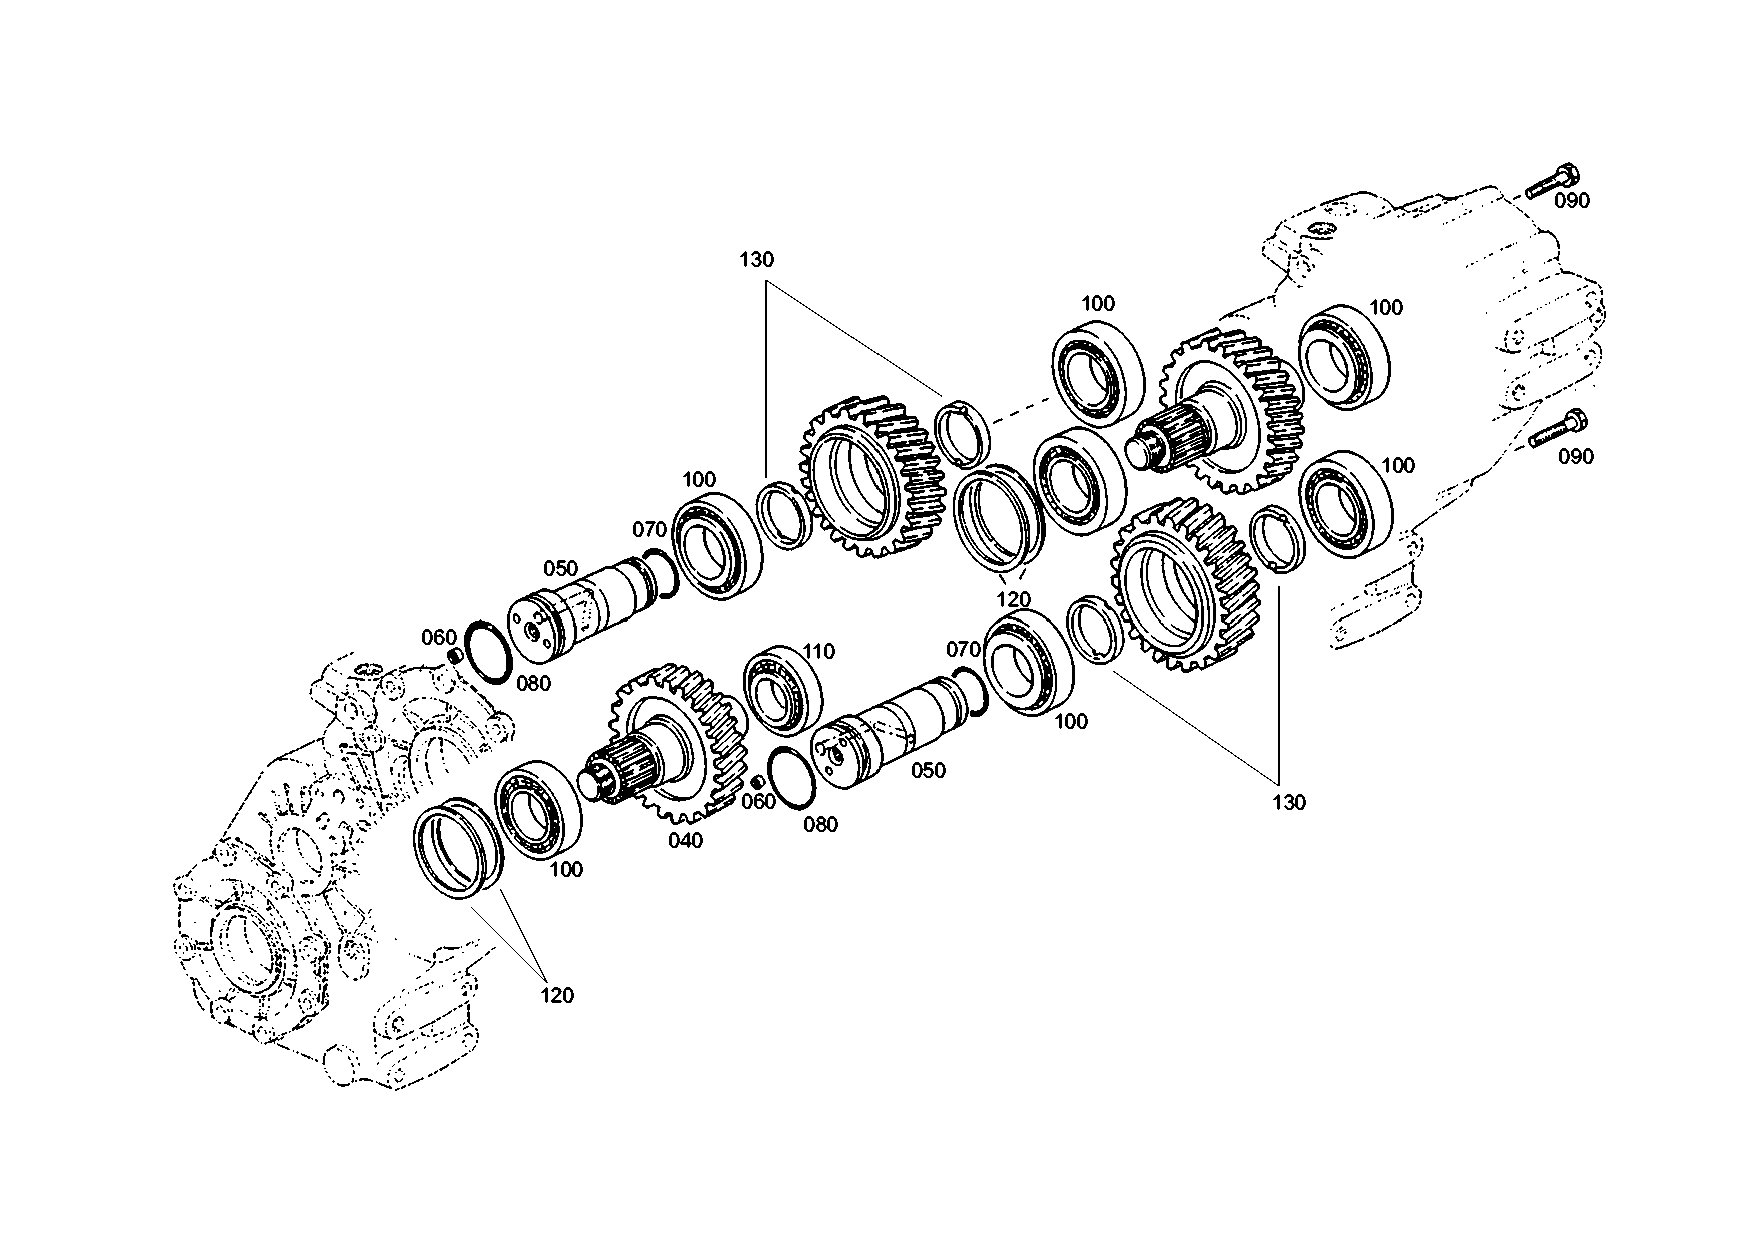 drawing for MAGNA STEYR 170500220018 - SHIM PLATE (figure 3)